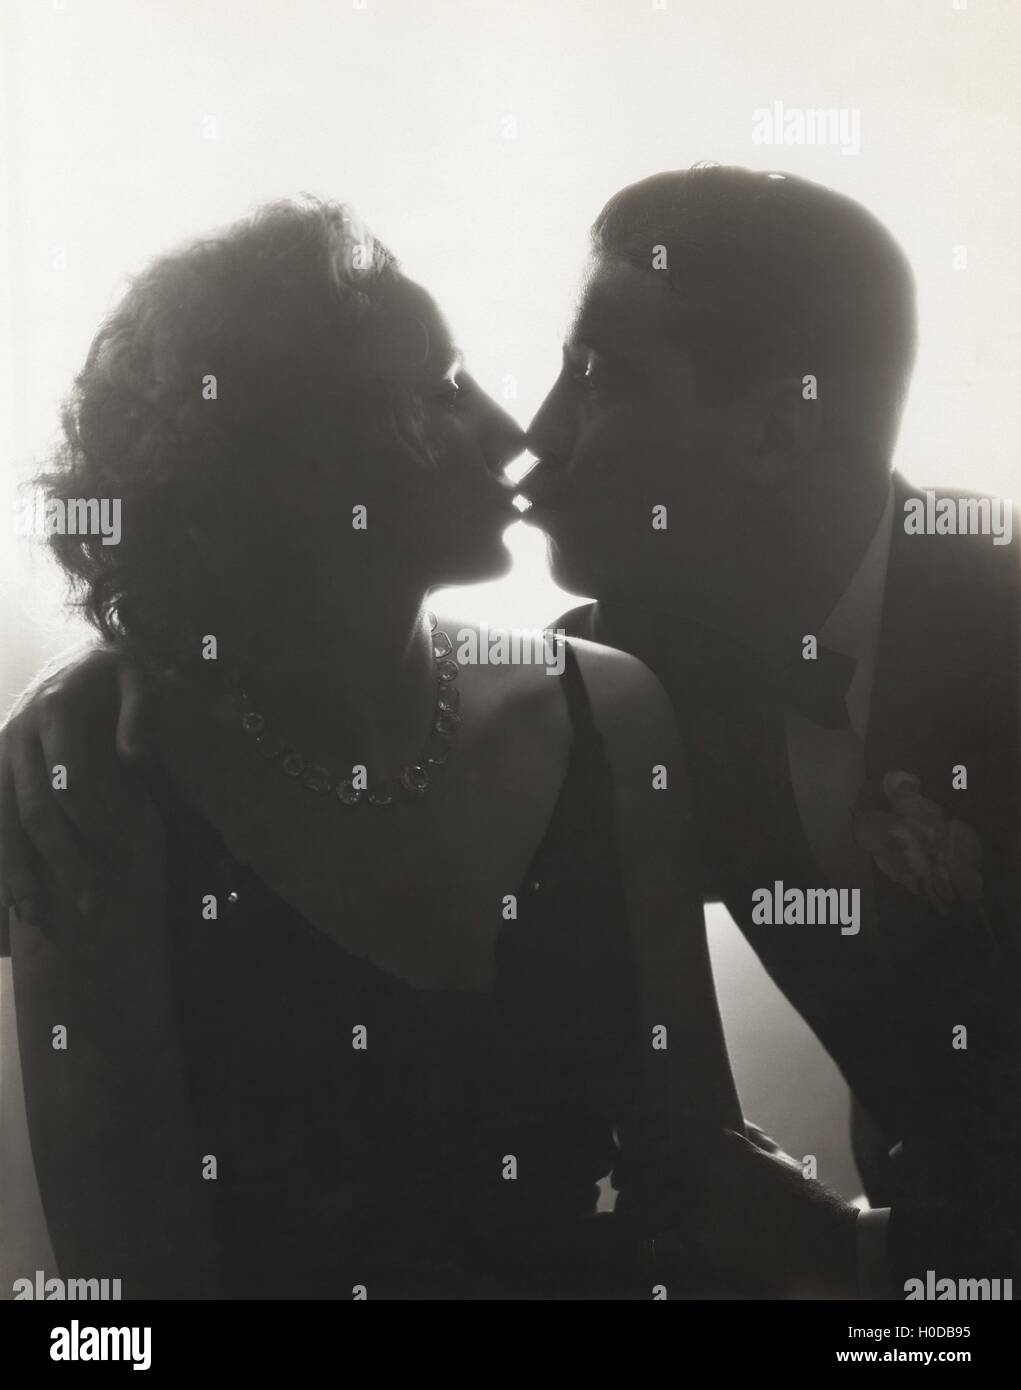 Couple kissing in silhouette Stock Photo